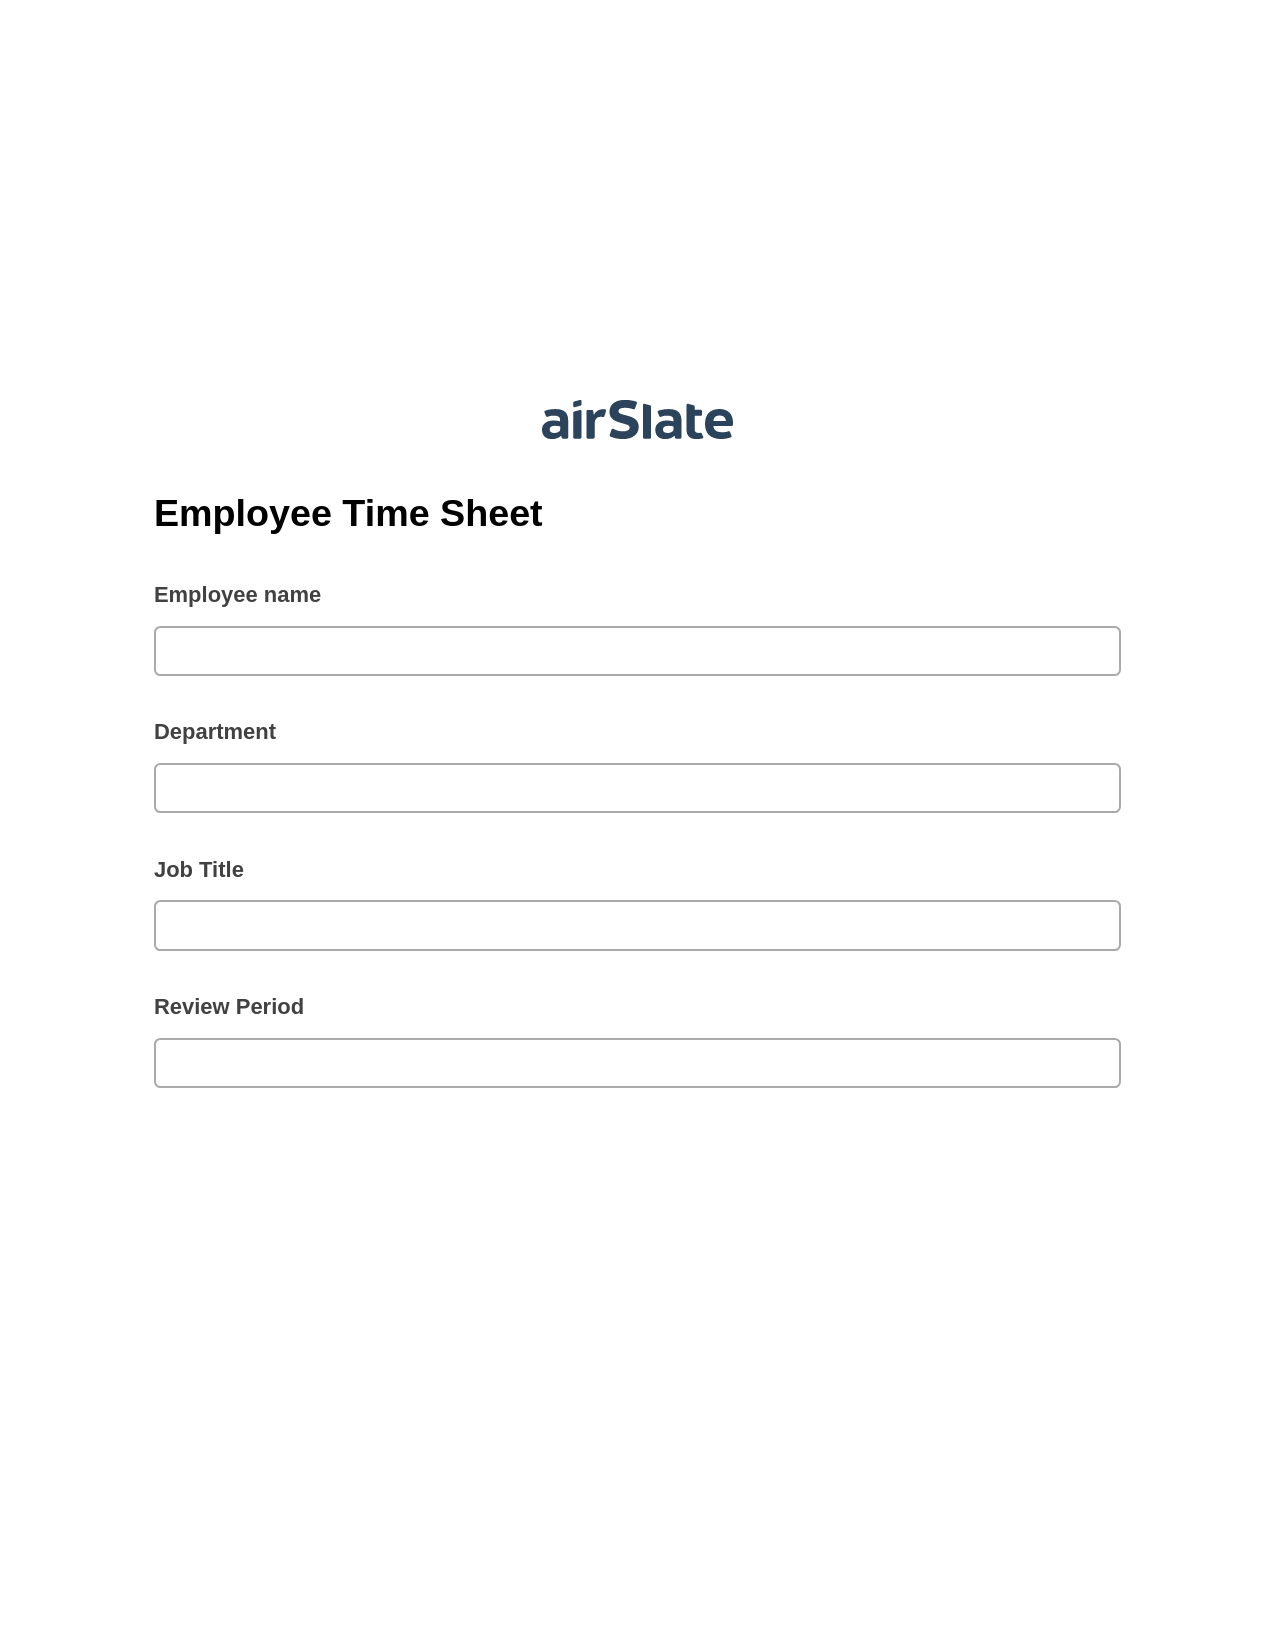 Multirole Employee Time Sheet Pre-fill from another Slate Bot, Send Mailchimp Campaign Bot, Webhook Postfinish Bot